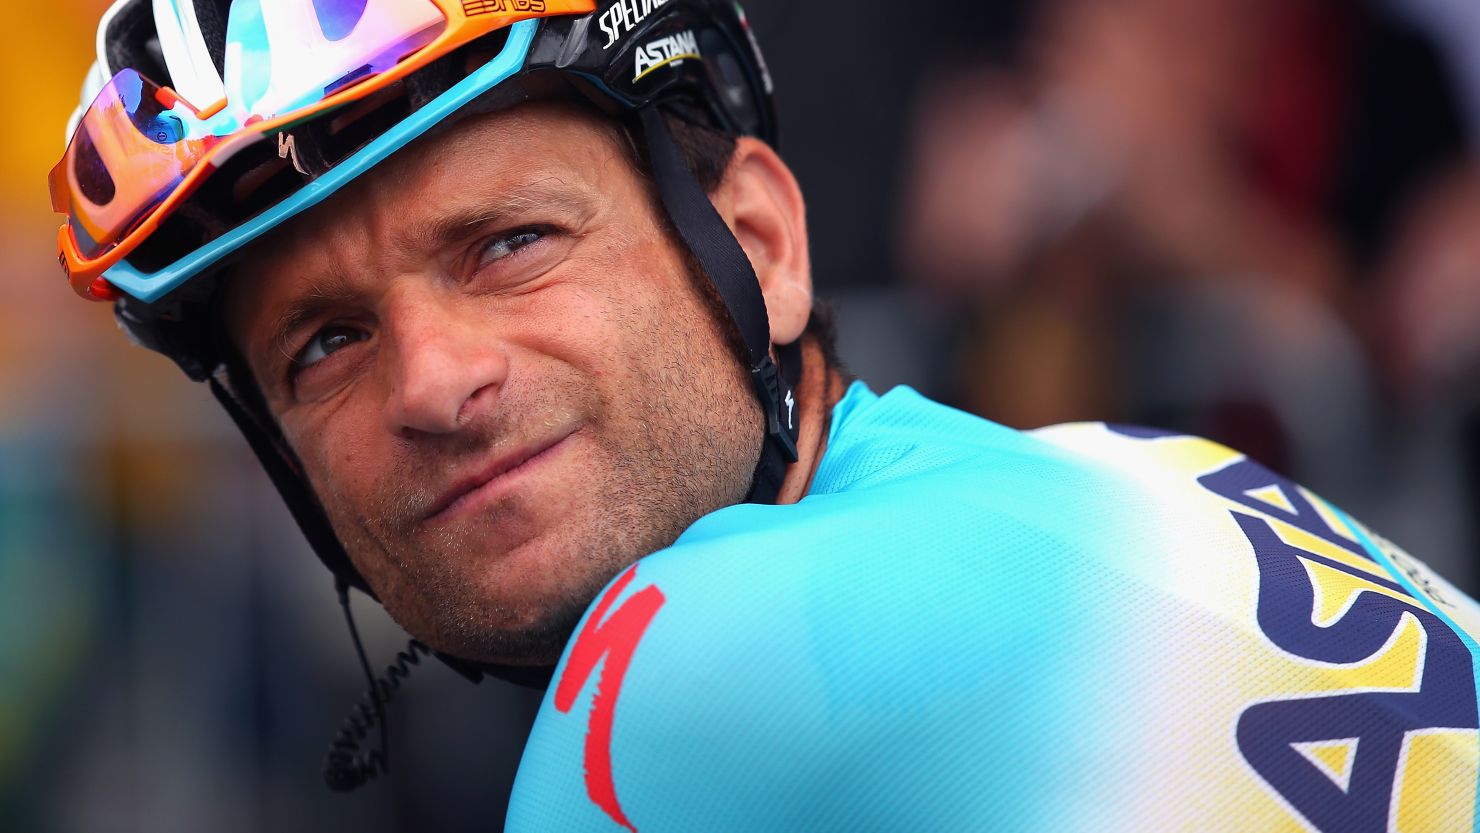 Italian cycling champ Michele Scarponi died after being hit by a van Saturday while training in central Italy 